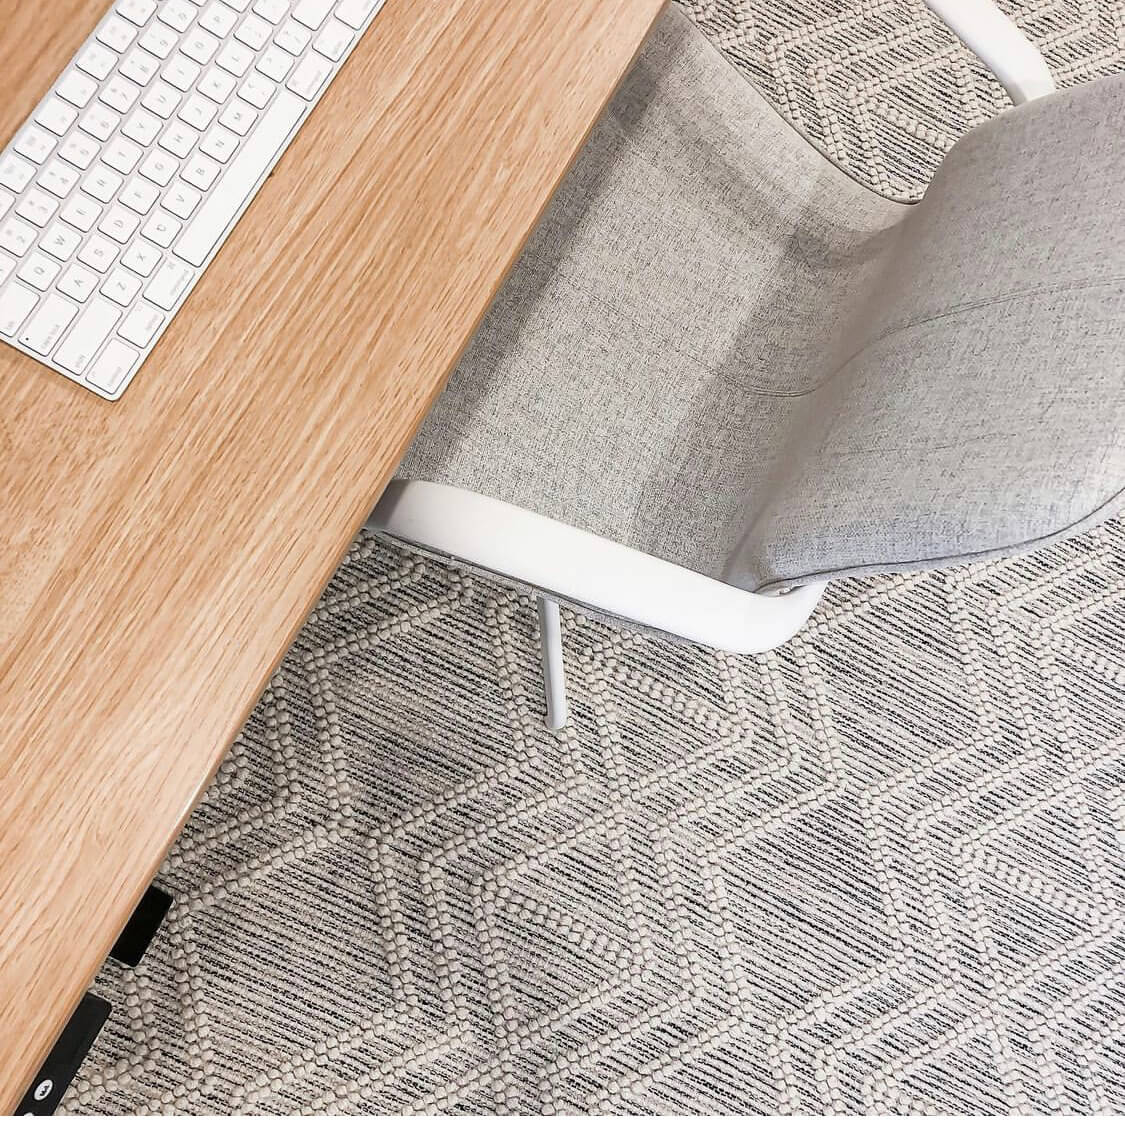 Rugs at Work: Enhancing Office Spaces with Style